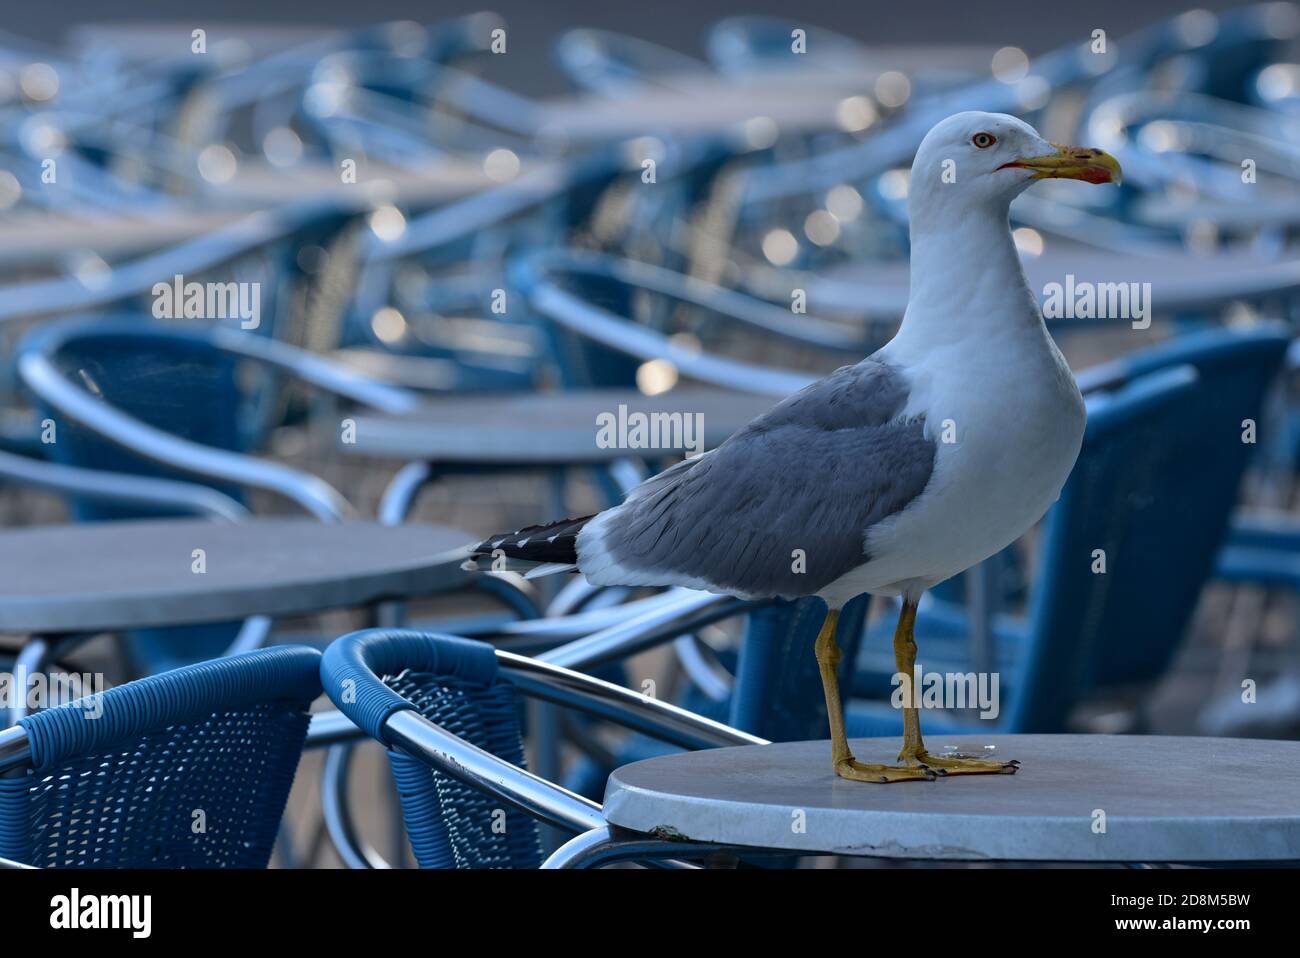 Seagull perched on a restaurant table in Saint Mark's Square waiting to cause trouble! Venice, Italy, Europe. Stock Photo